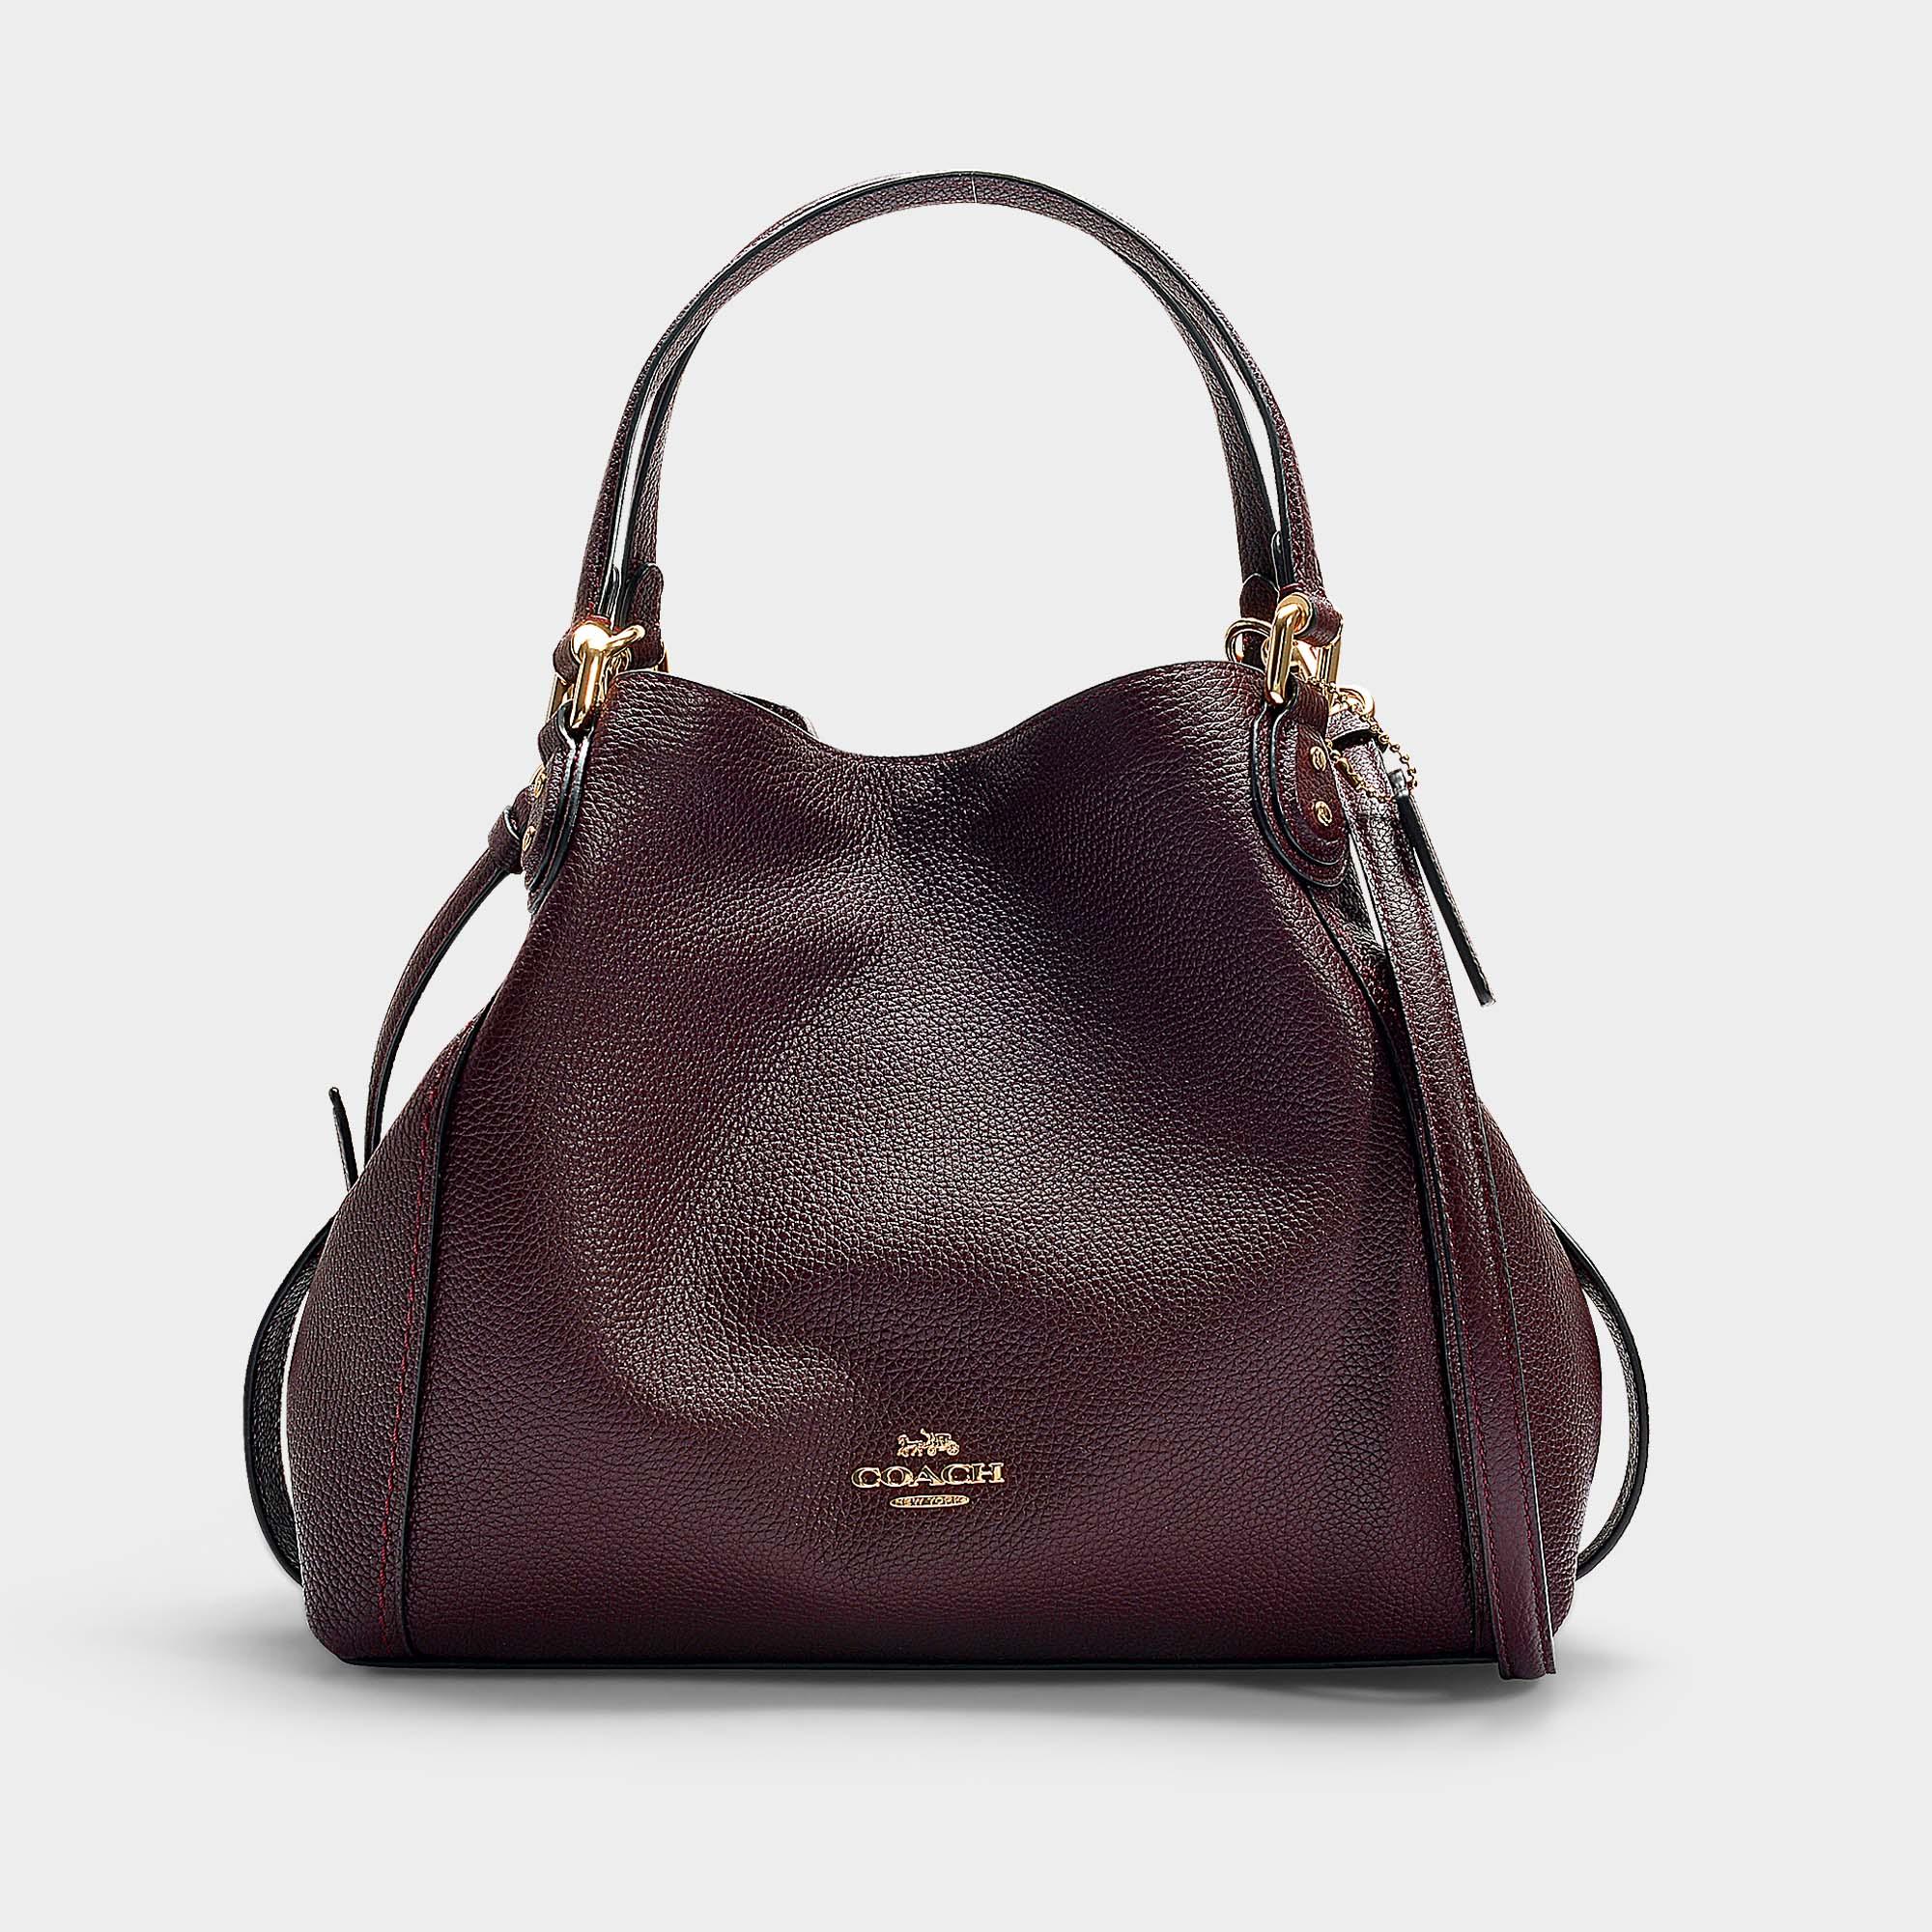 COACH Polished Pebble Leather Edie 28 Shoulder Bag In Burgundy Calfskin in Red - Lyst